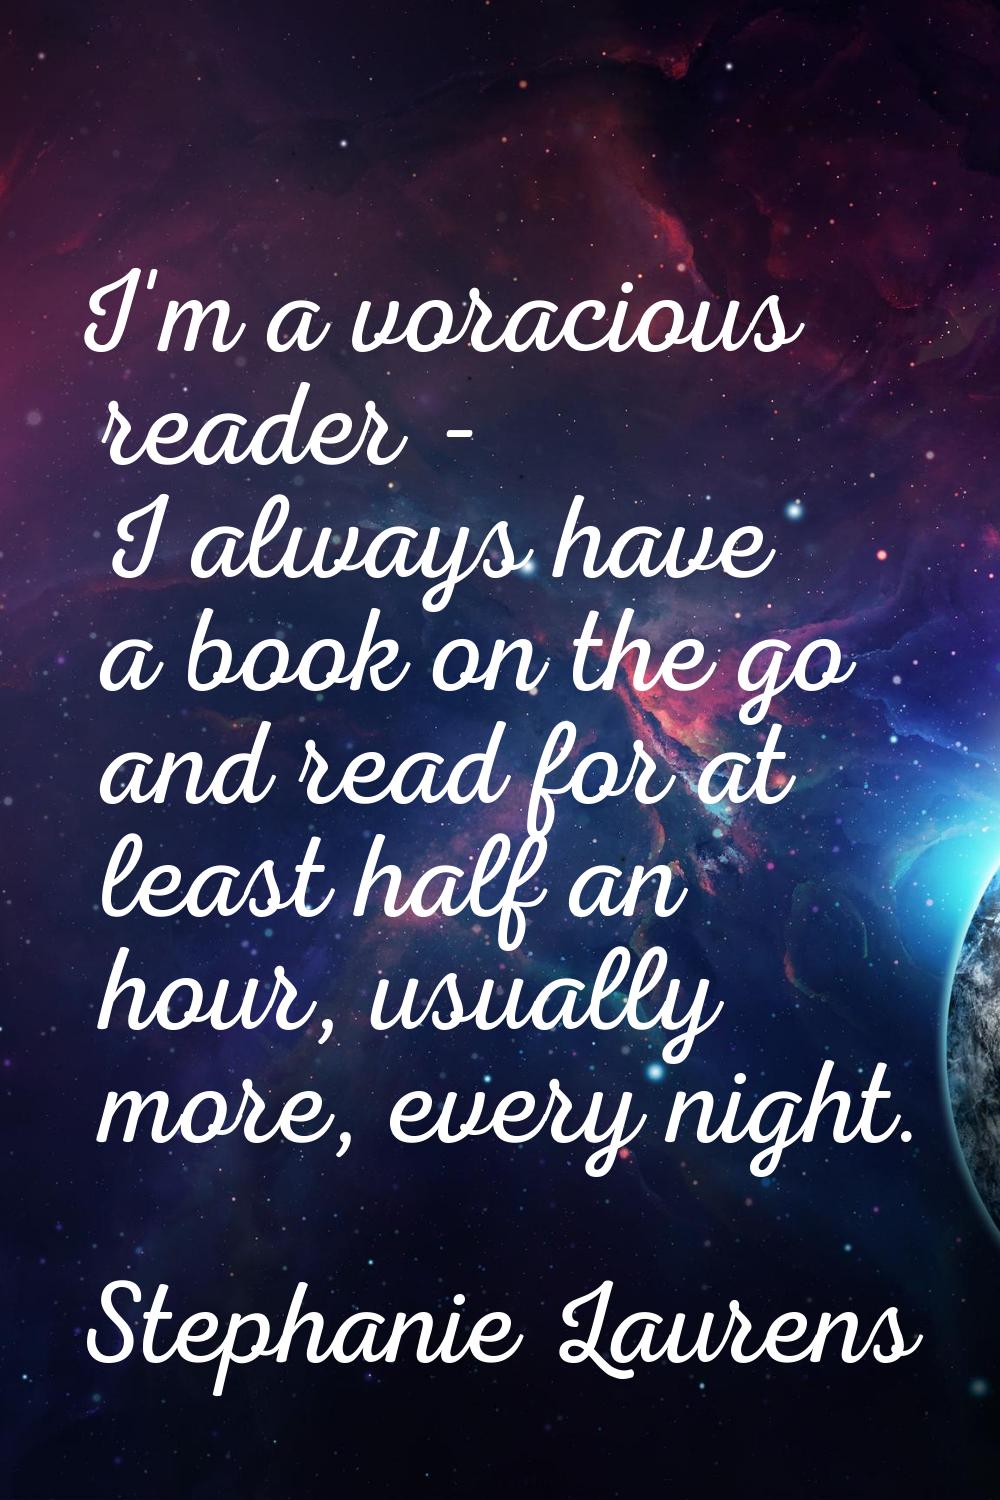 I'm a voracious reader - I always have a book on the go and read for at least half an hour, usually